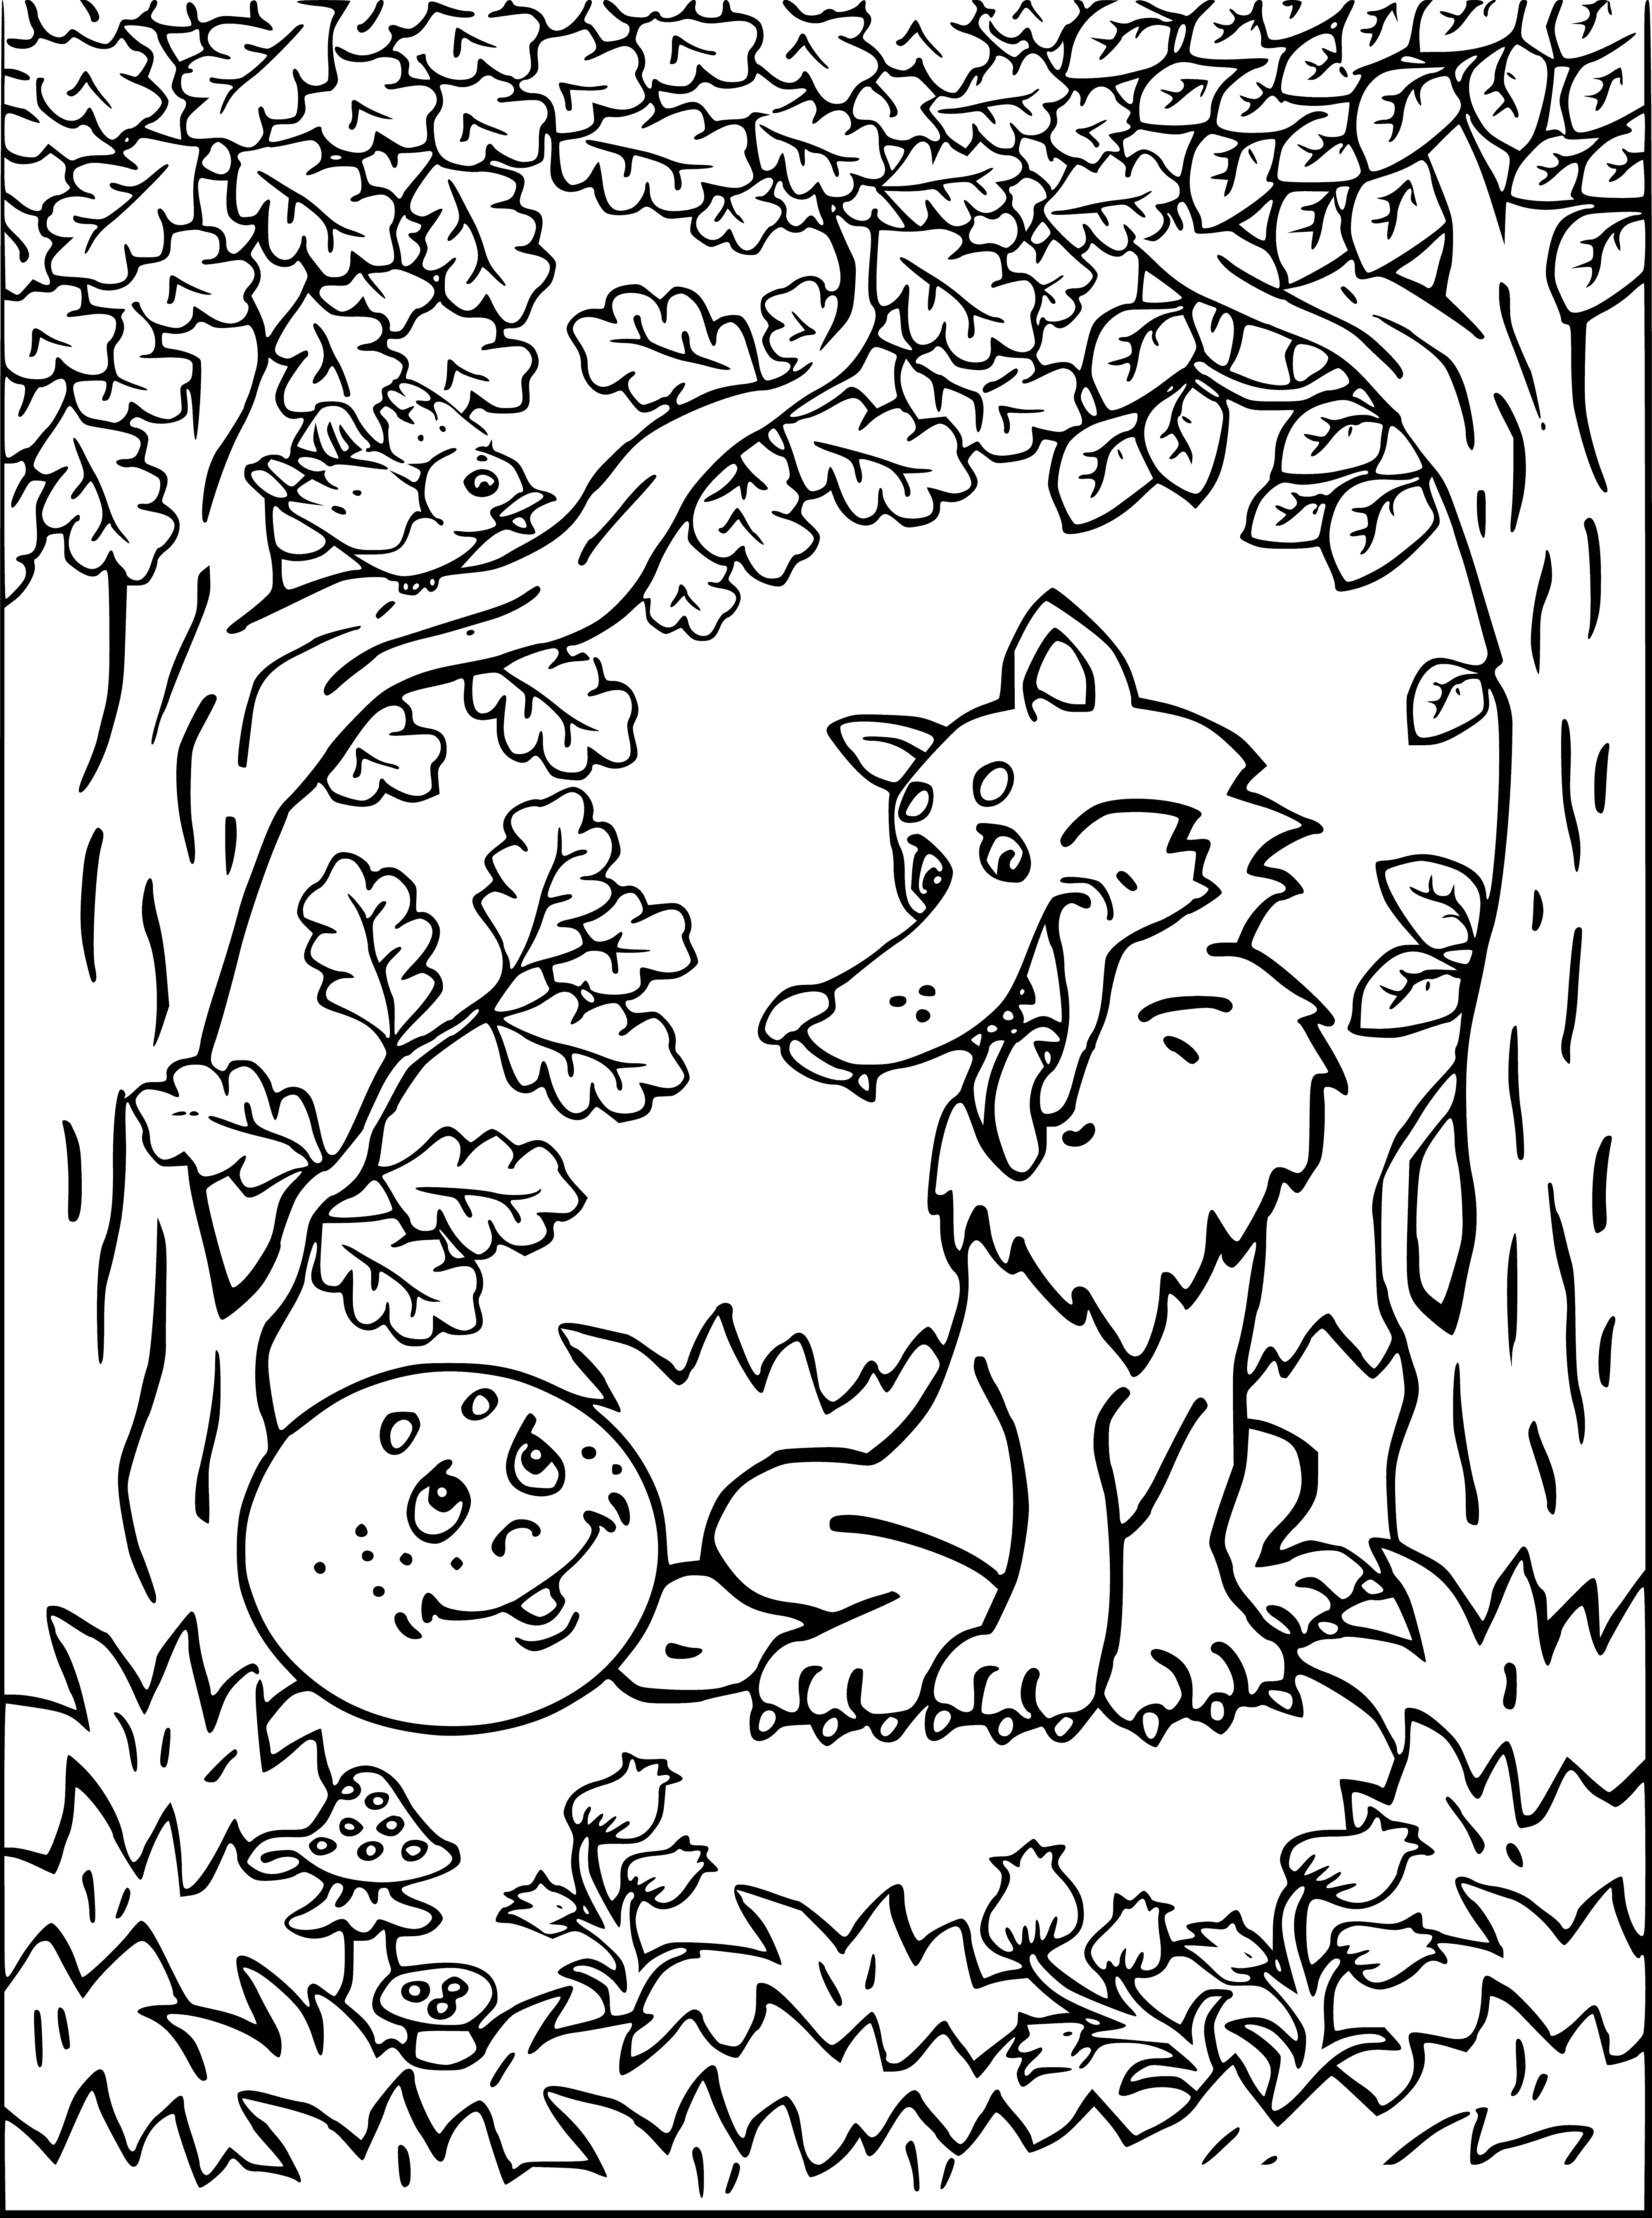 Gingerbread man and wolf coloring page